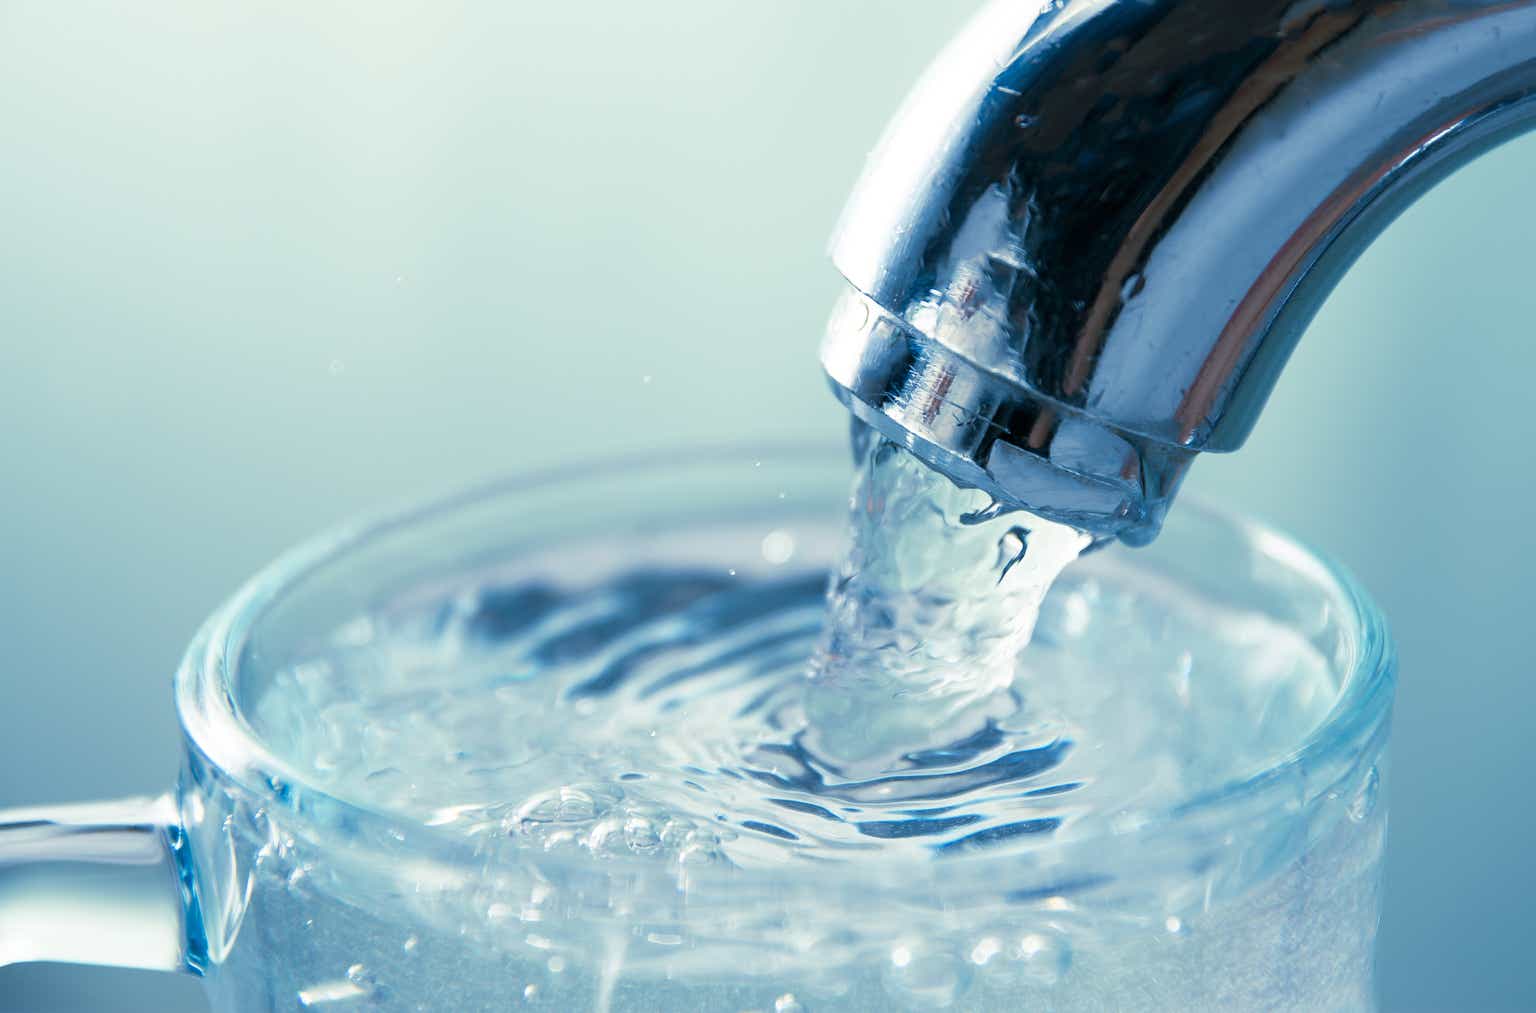 California Water Service: An Undervalued Water Utility To Buy Now (NYSE:CWT)